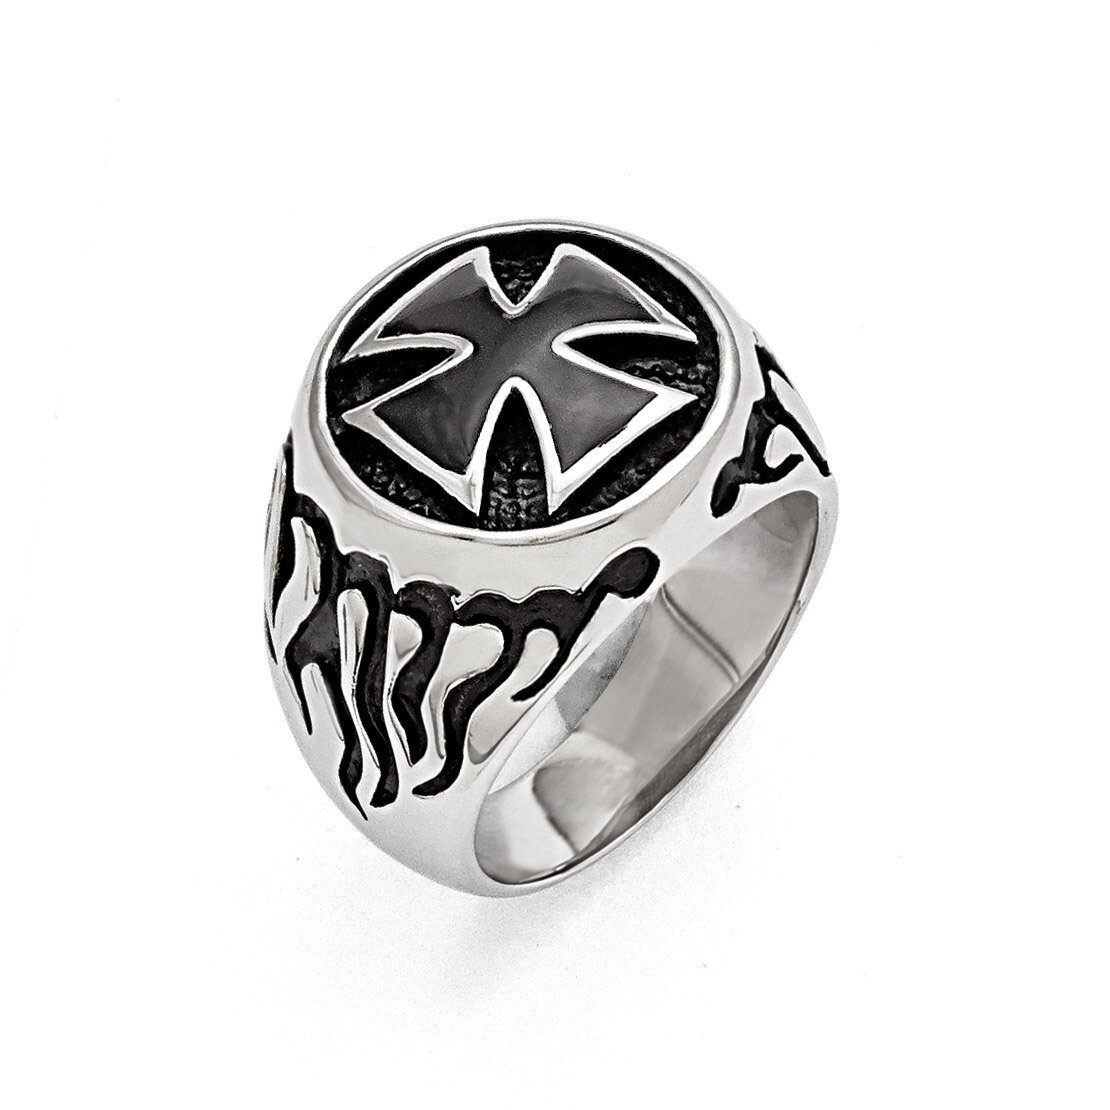 Polished Antiqued and Black IP-plated Ring - Stainless Steel SR416